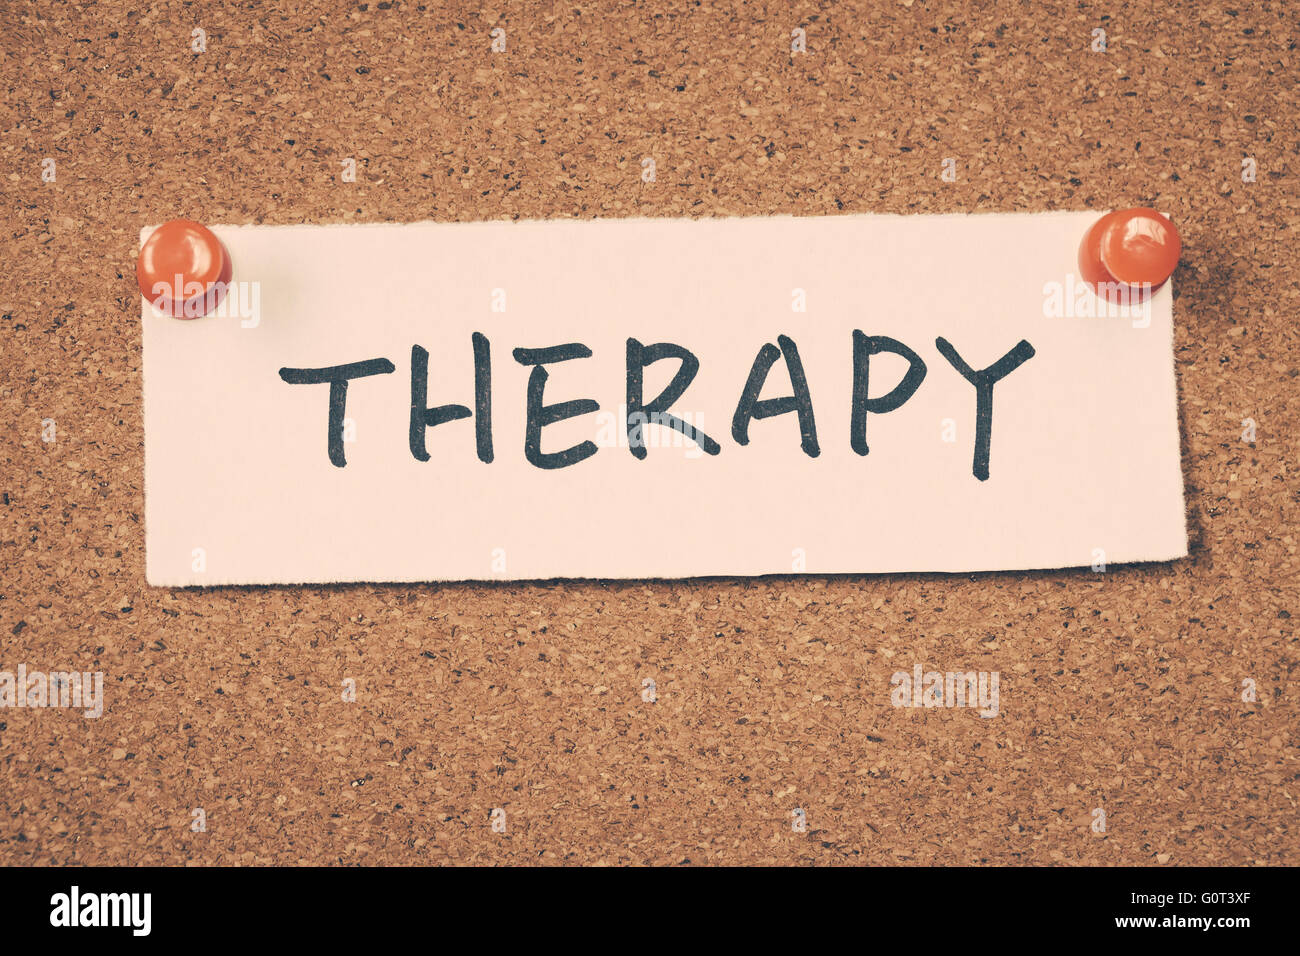 therapy Stock Photo